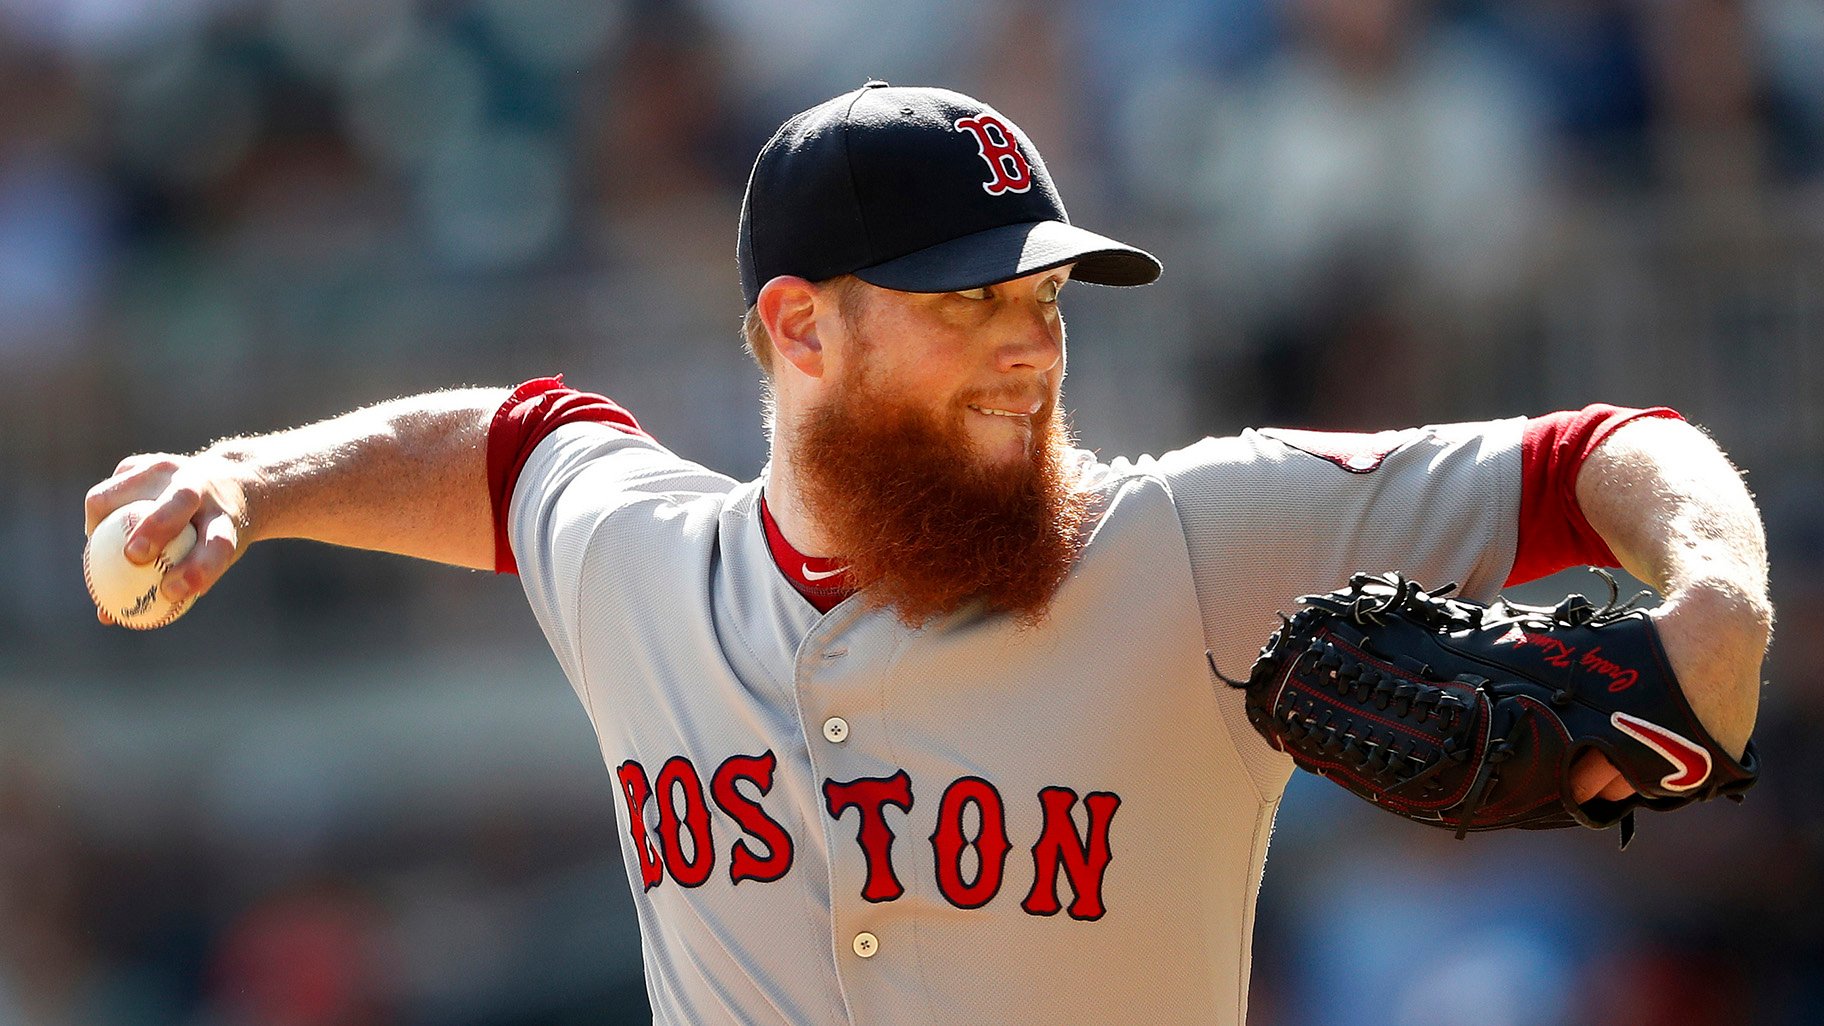 Free-Agent Closer Craig Kimbrel, Cubs Agree to 3-Year Deal, Chicago News